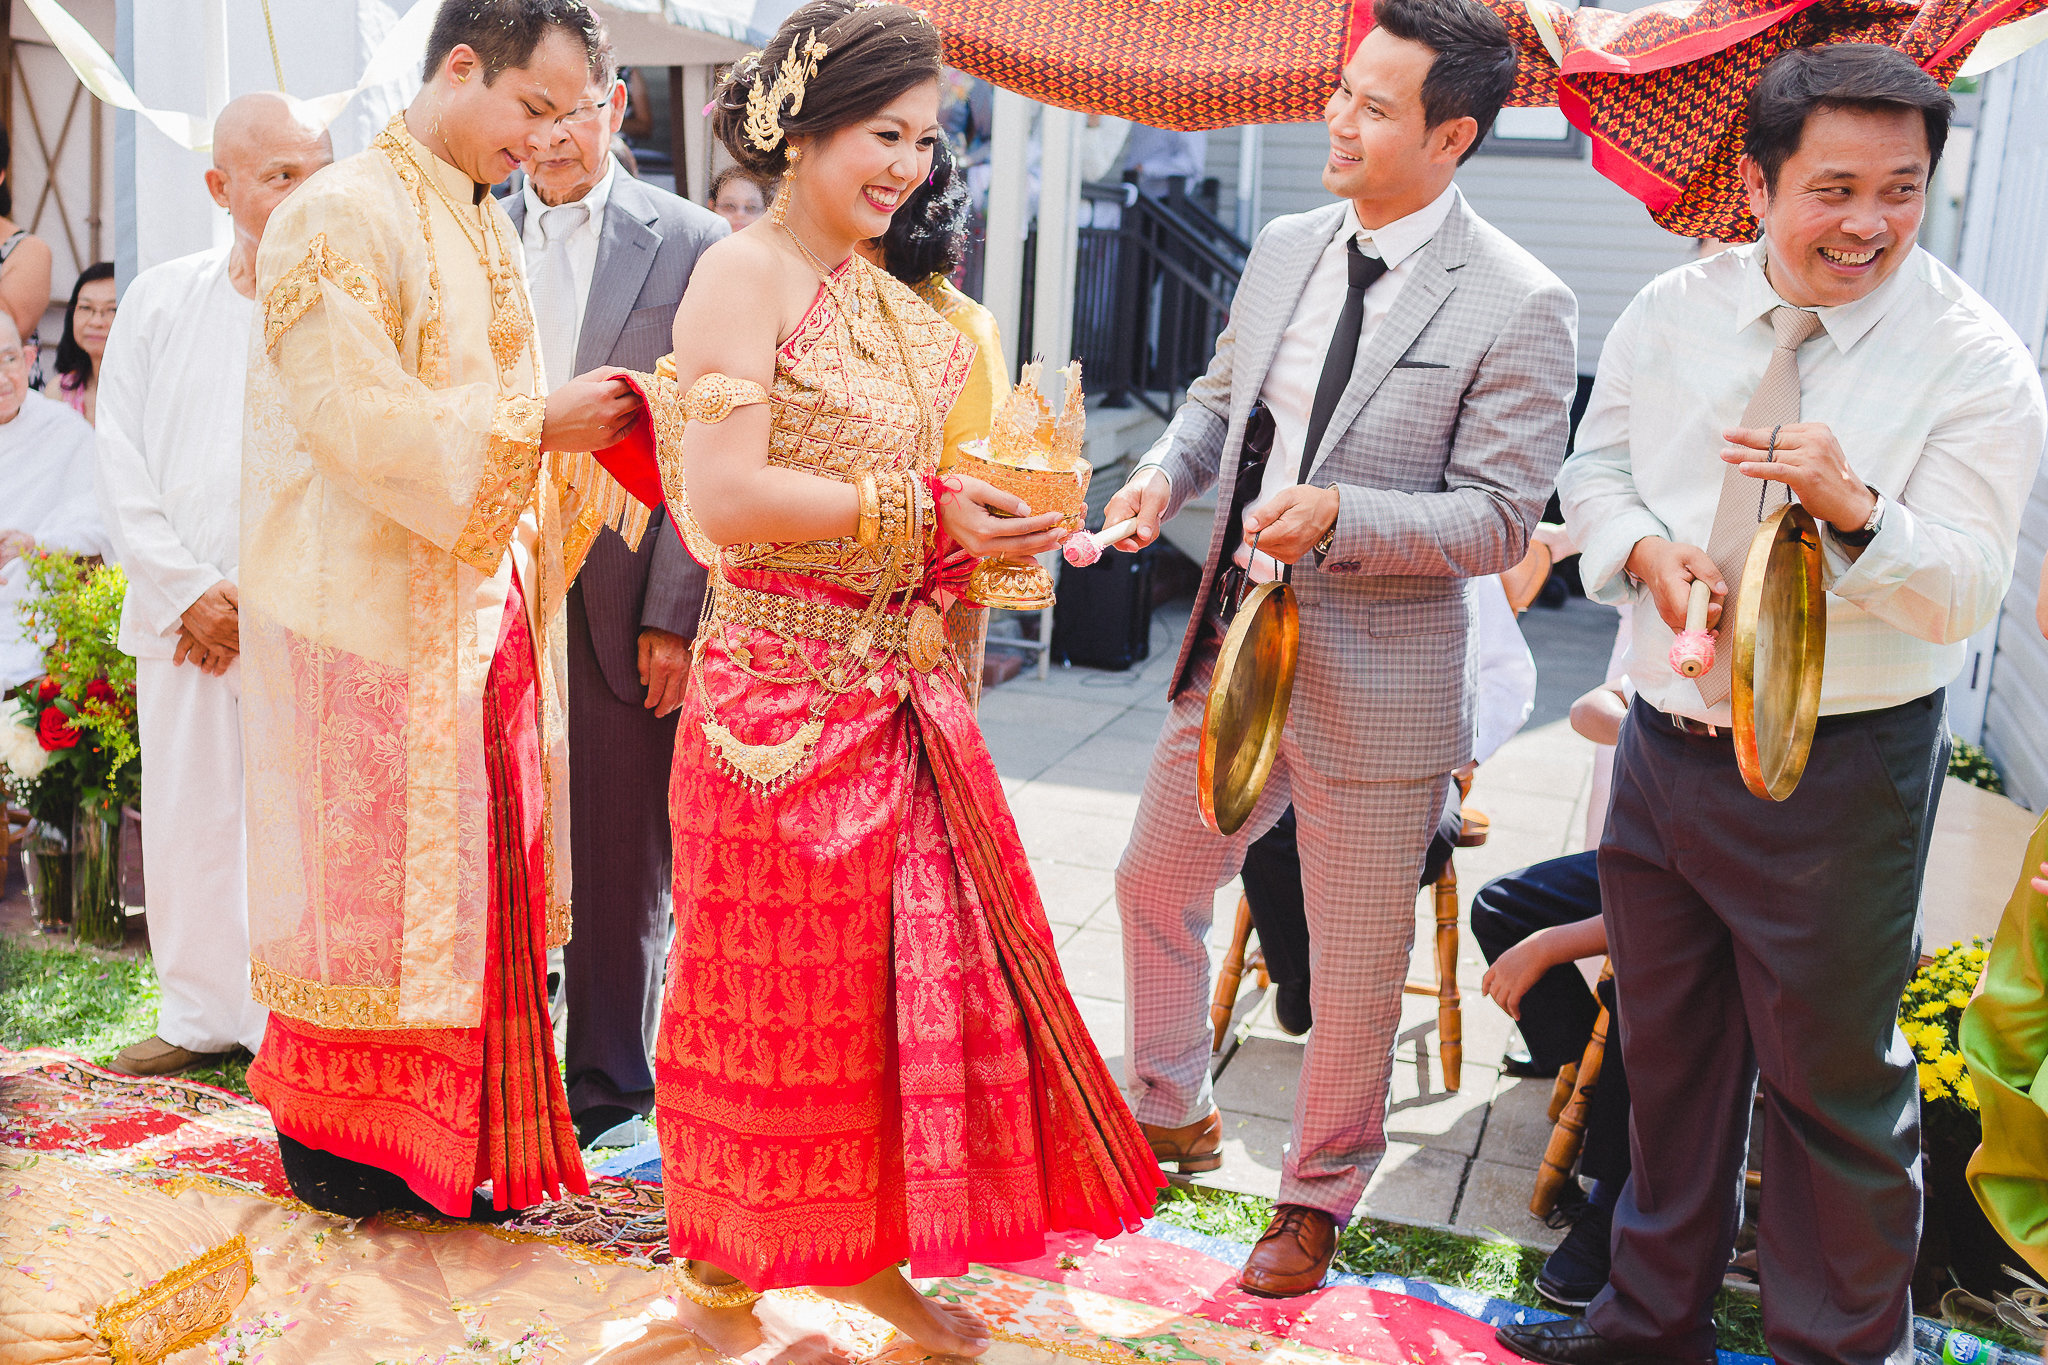 photographe-montreal-mariage-culturel-traditionnel-cambodgien-lisa-renault-photographie-traditional-cultural-cambodian-wedding-79